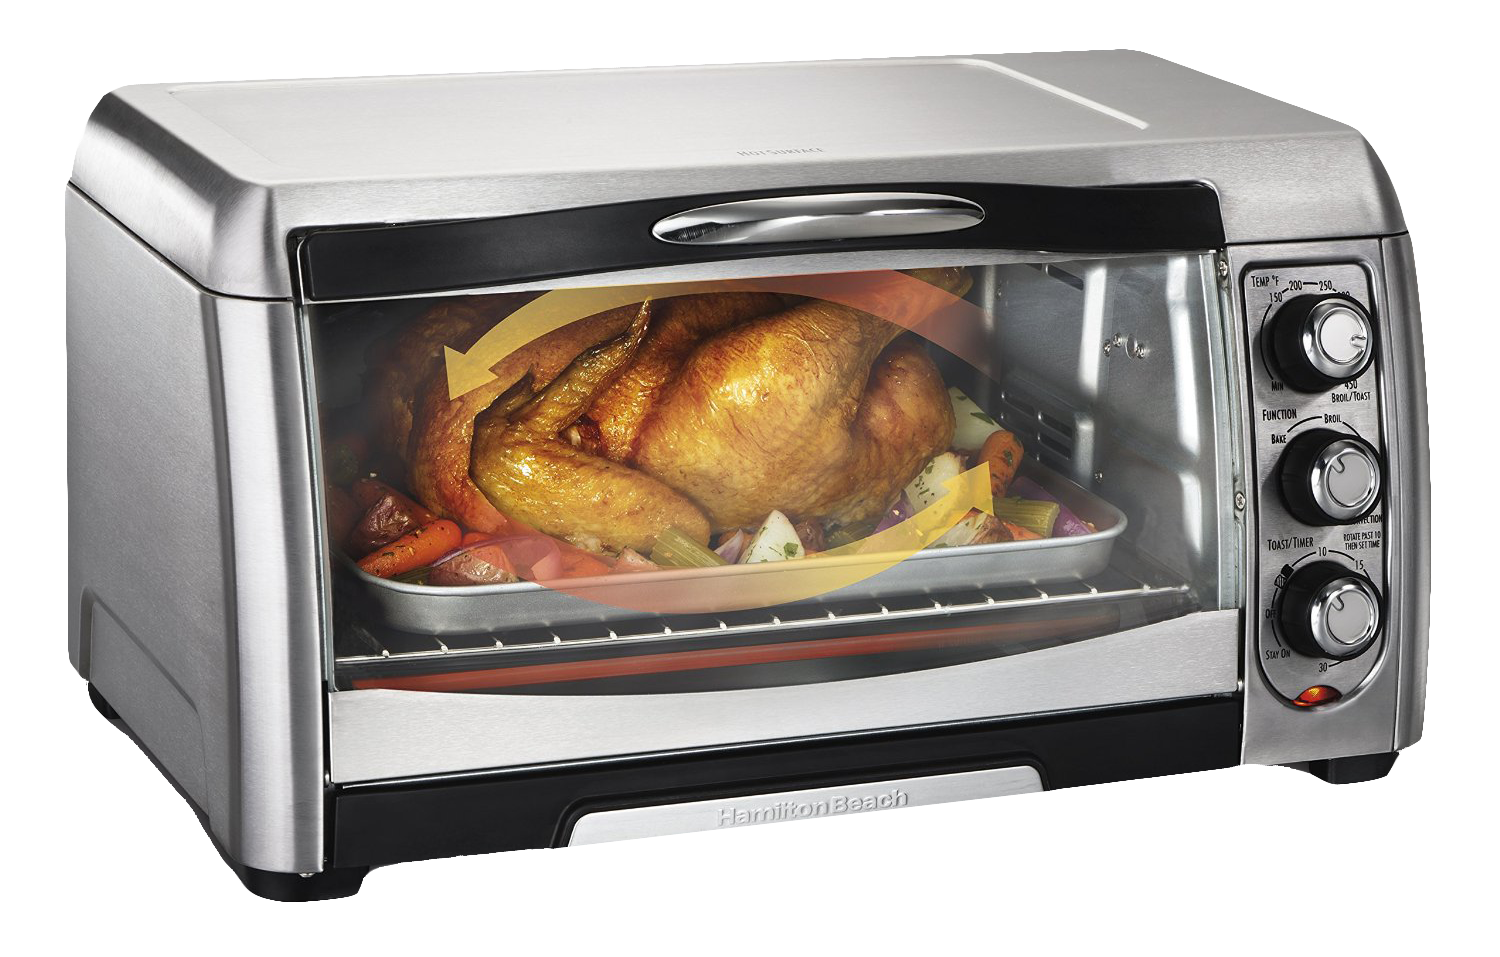 microwave clipart oven toaster